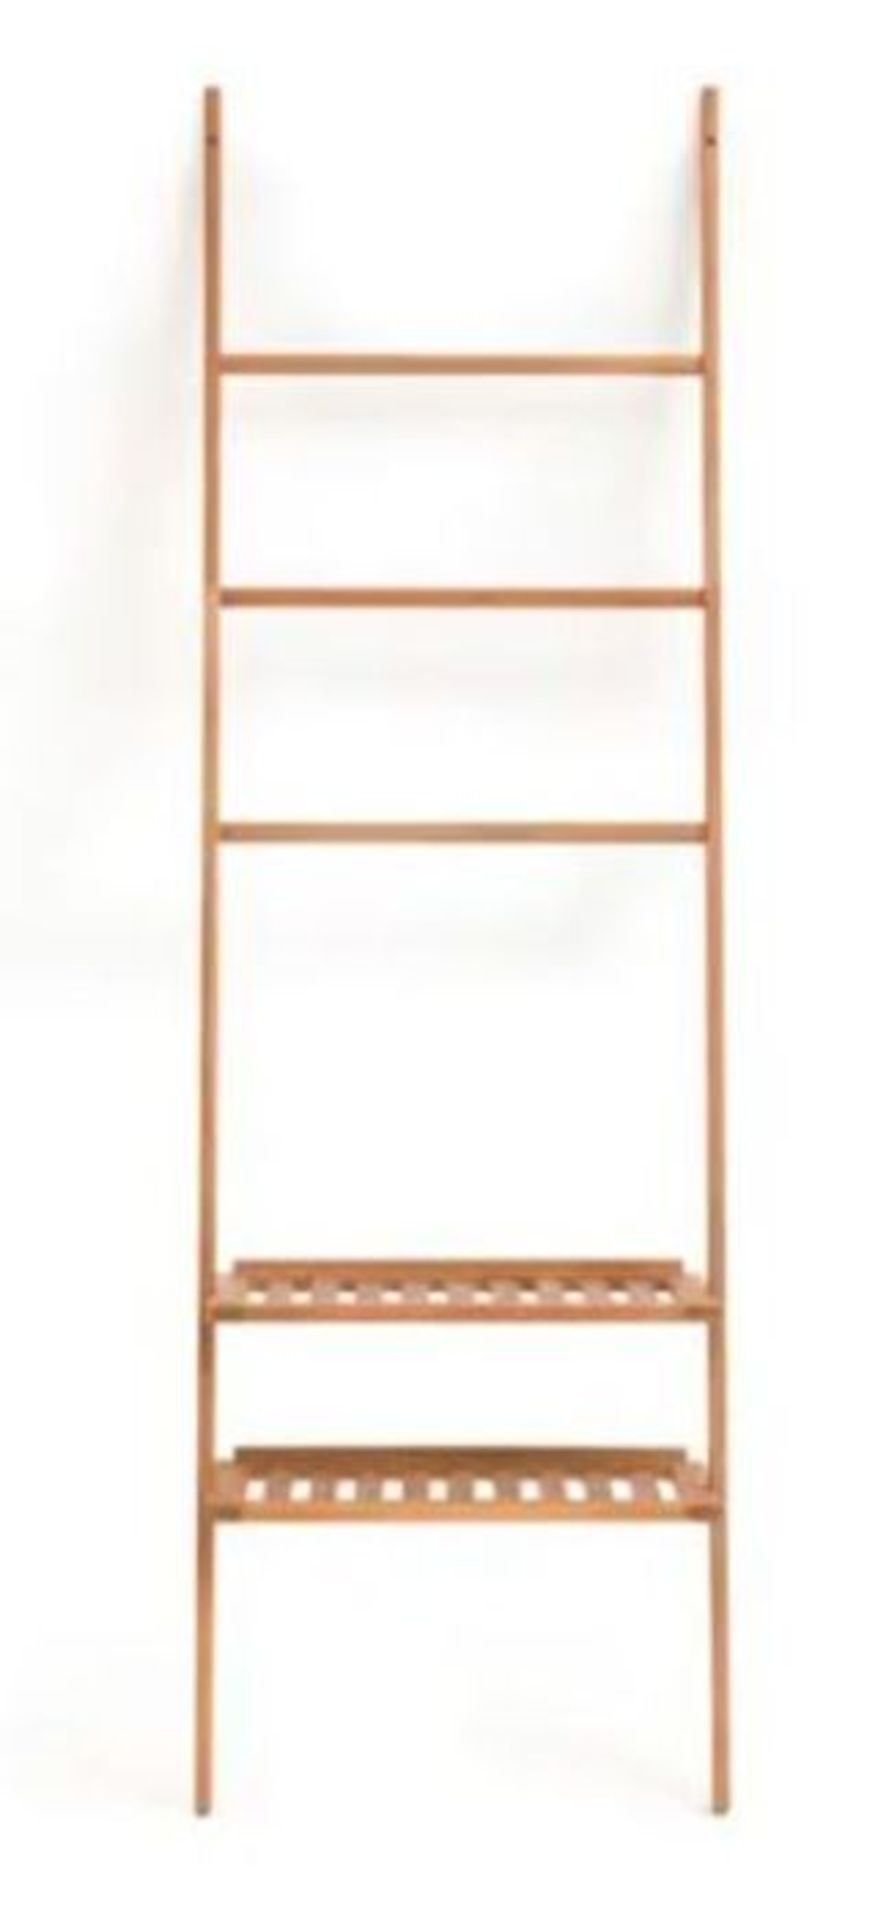 LADDER-STYLE SHELVING UNIT IN OILED ACACIA WITH TEAK FINISH / RRP £70.00 / CUSTOMER RETURN GRADE A